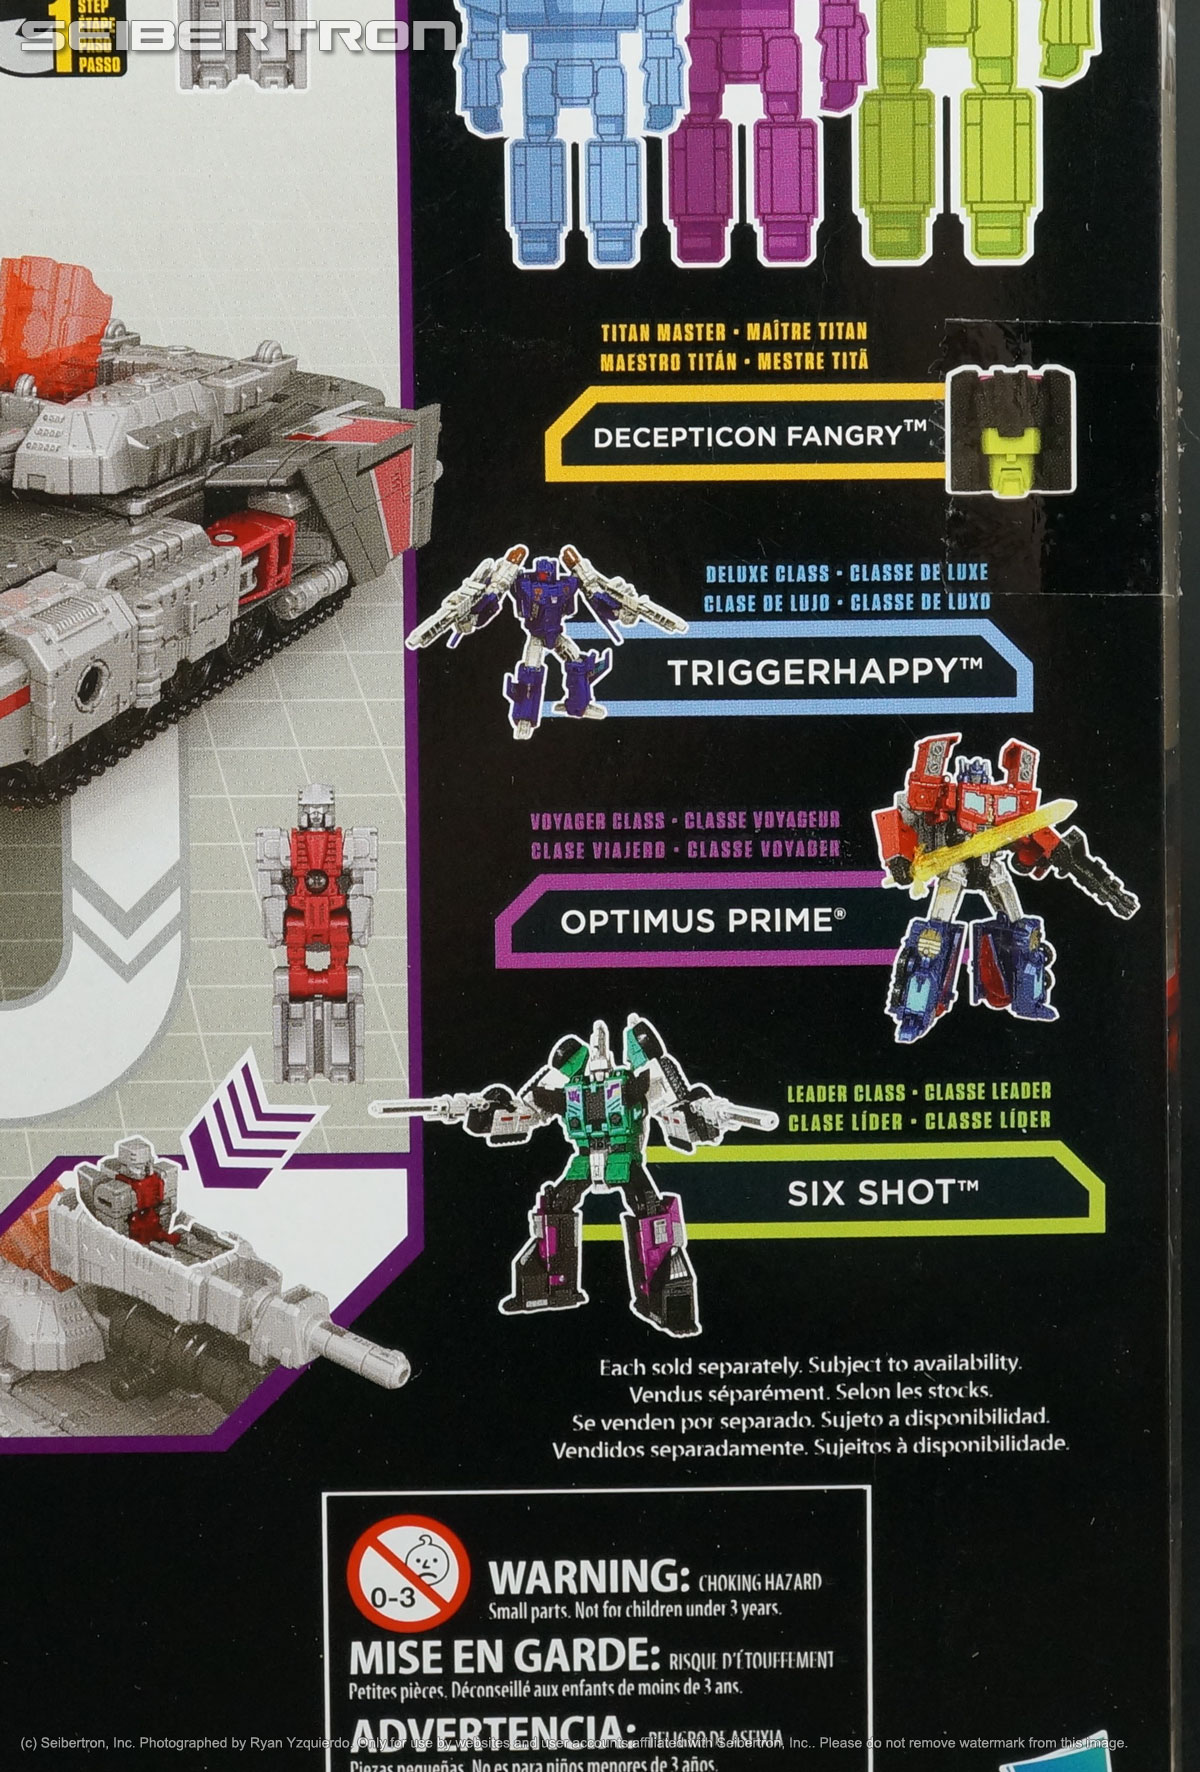 Transformers, Gobots, Masters of the Universe, Teenage Mutant Ninja Turtles, Shopkins, Comic Books, and other items items listings from Seibertron.com: Voyager Class MEGATRON Transformers Titans Return Generations New 2017